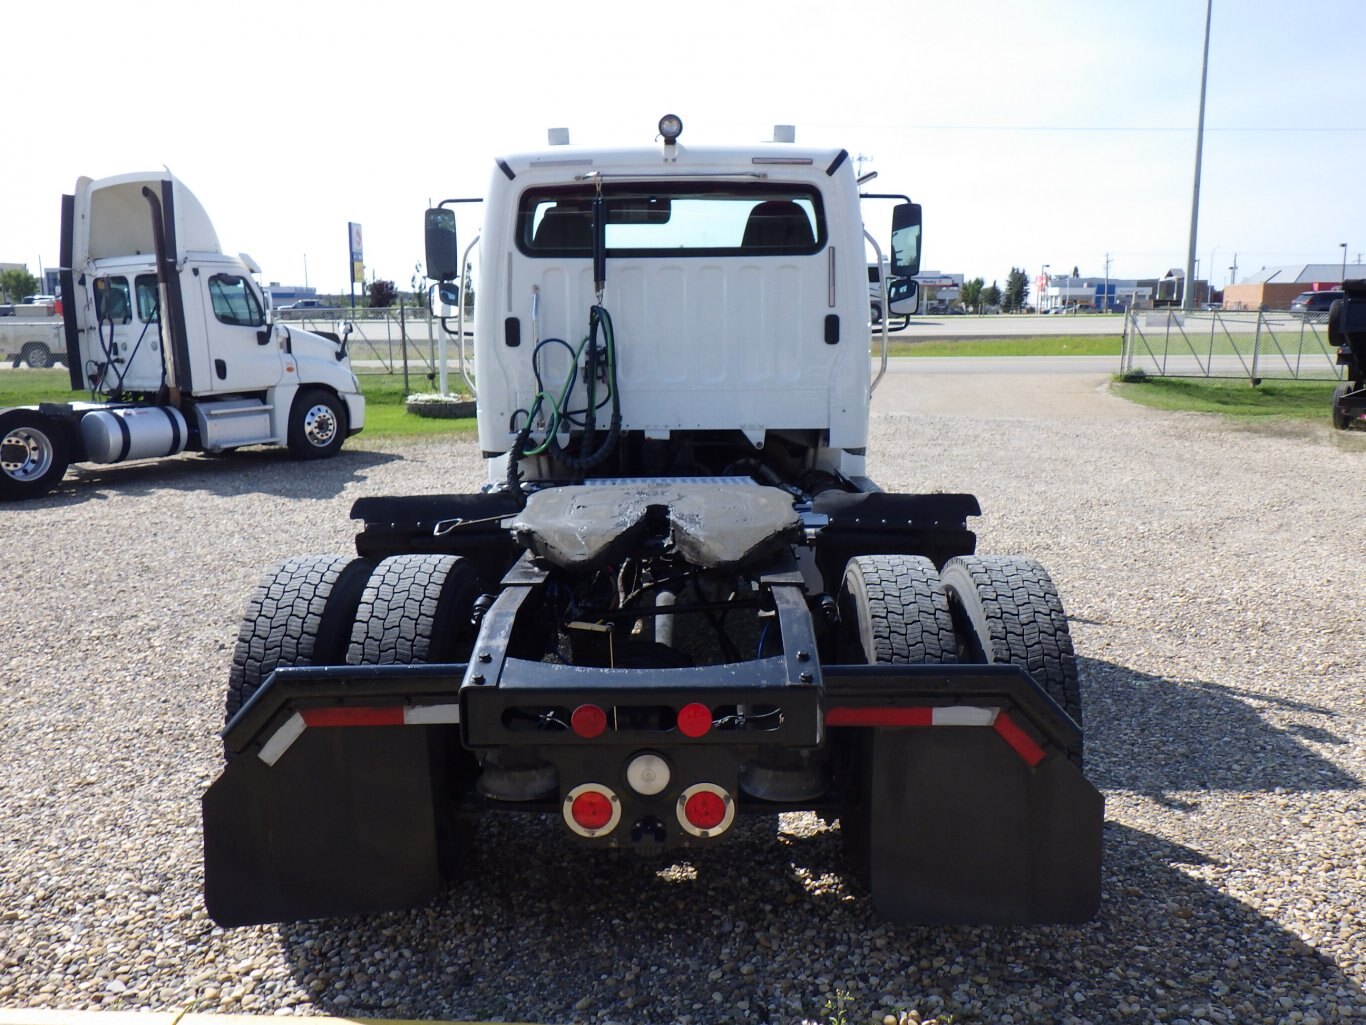 2016 FREIGHTLINER M2 SINGLE AXLE DAY CAB TRACTOR # 3889